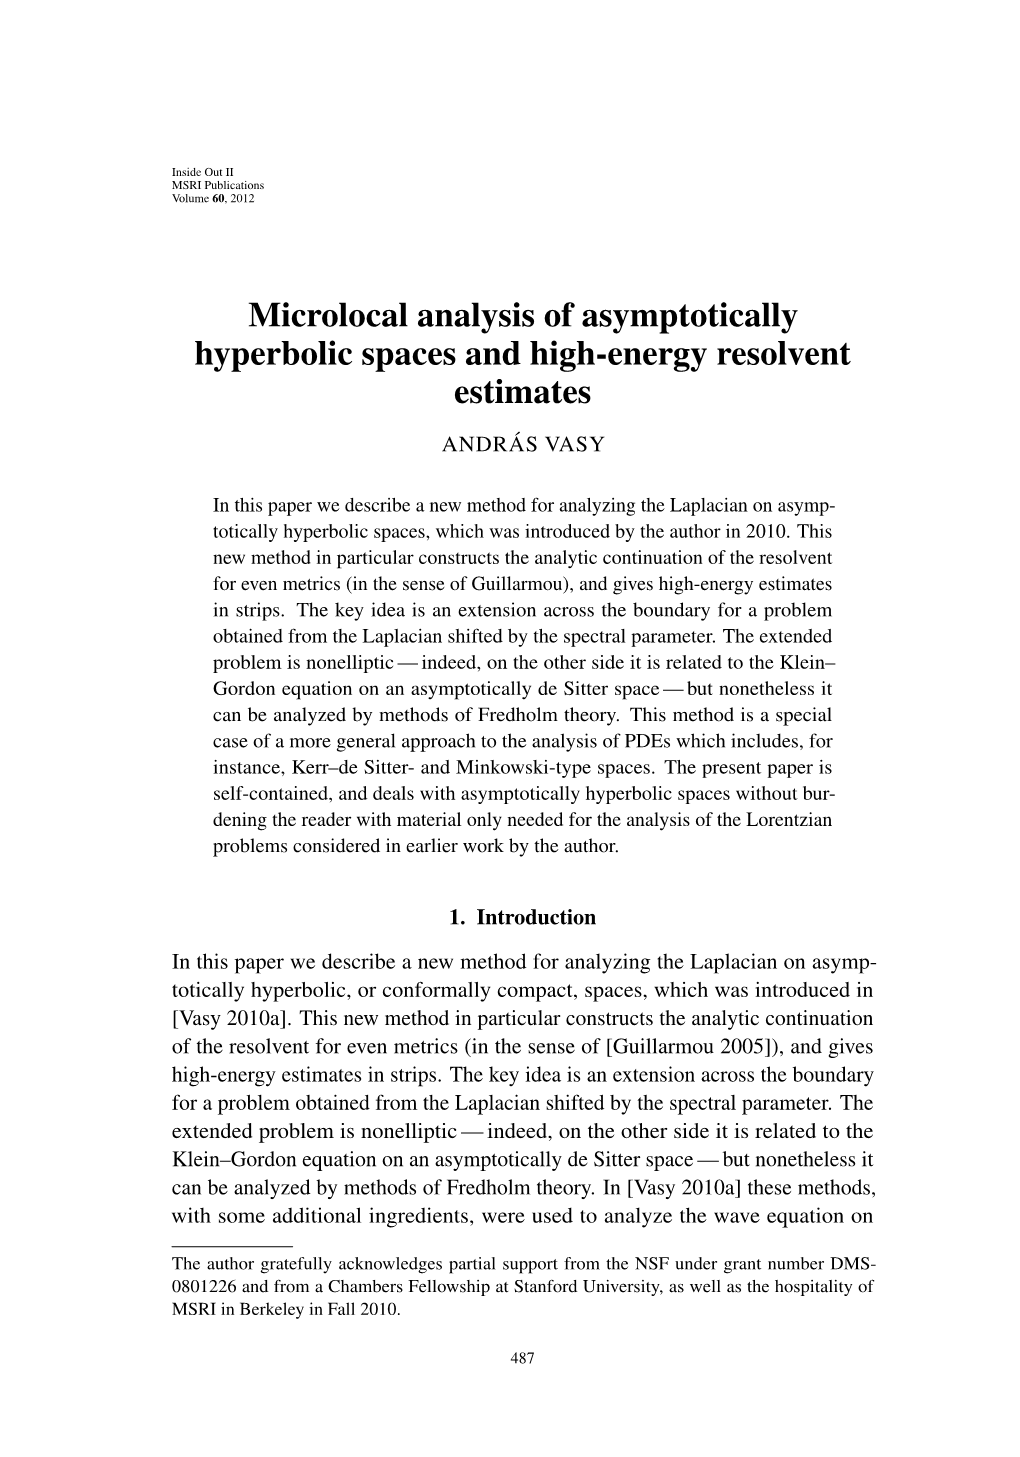 Microlocal Analysis of Asymptotically Hyperbolic Spaces and High-Energy Resolvent Estimates